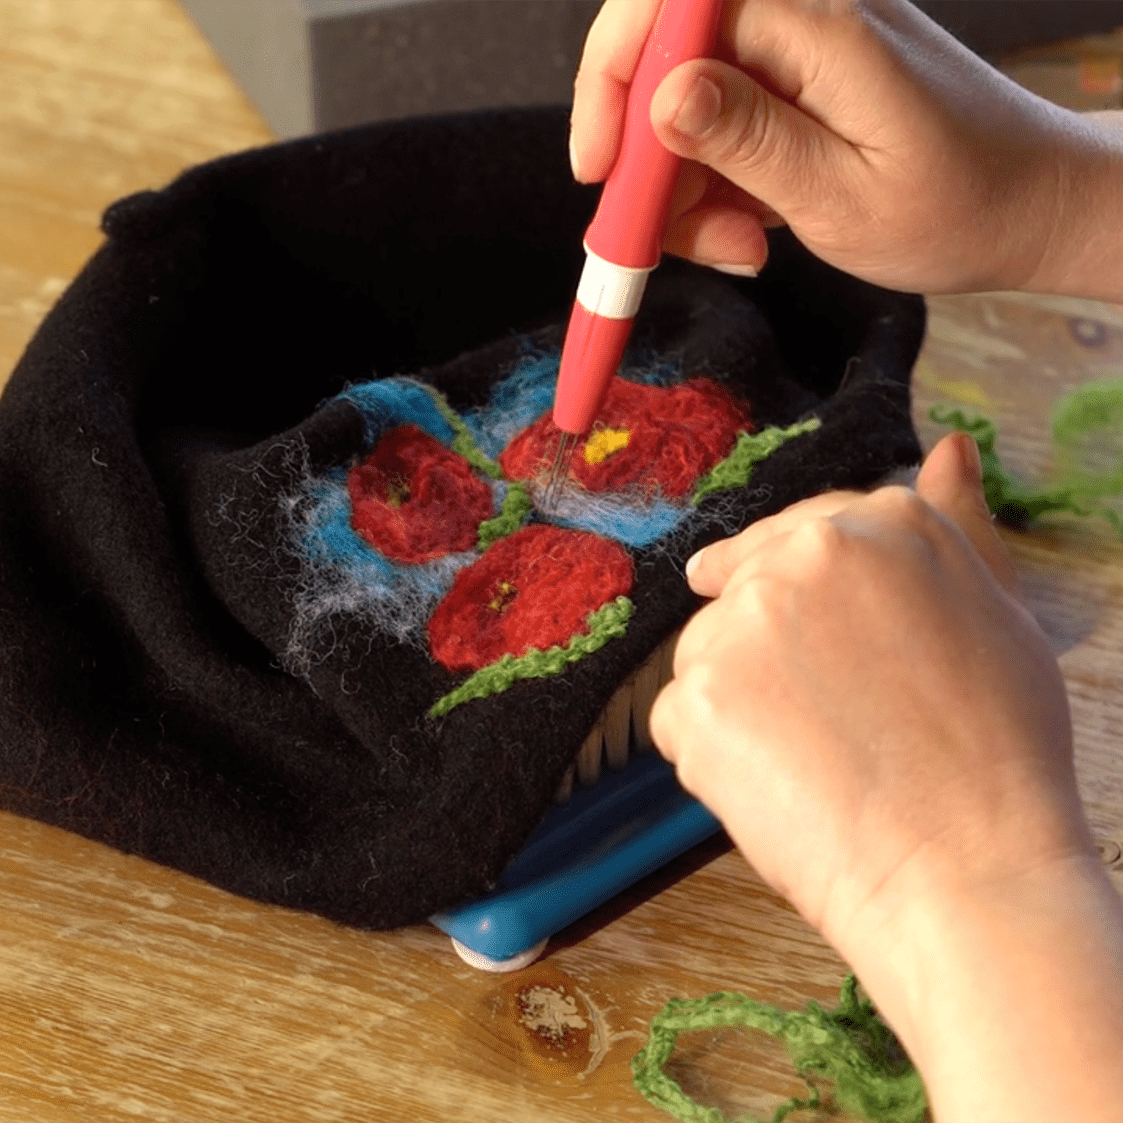 Video courses – felting for beginners, needle felting appliqués on fabric and material, tutorial